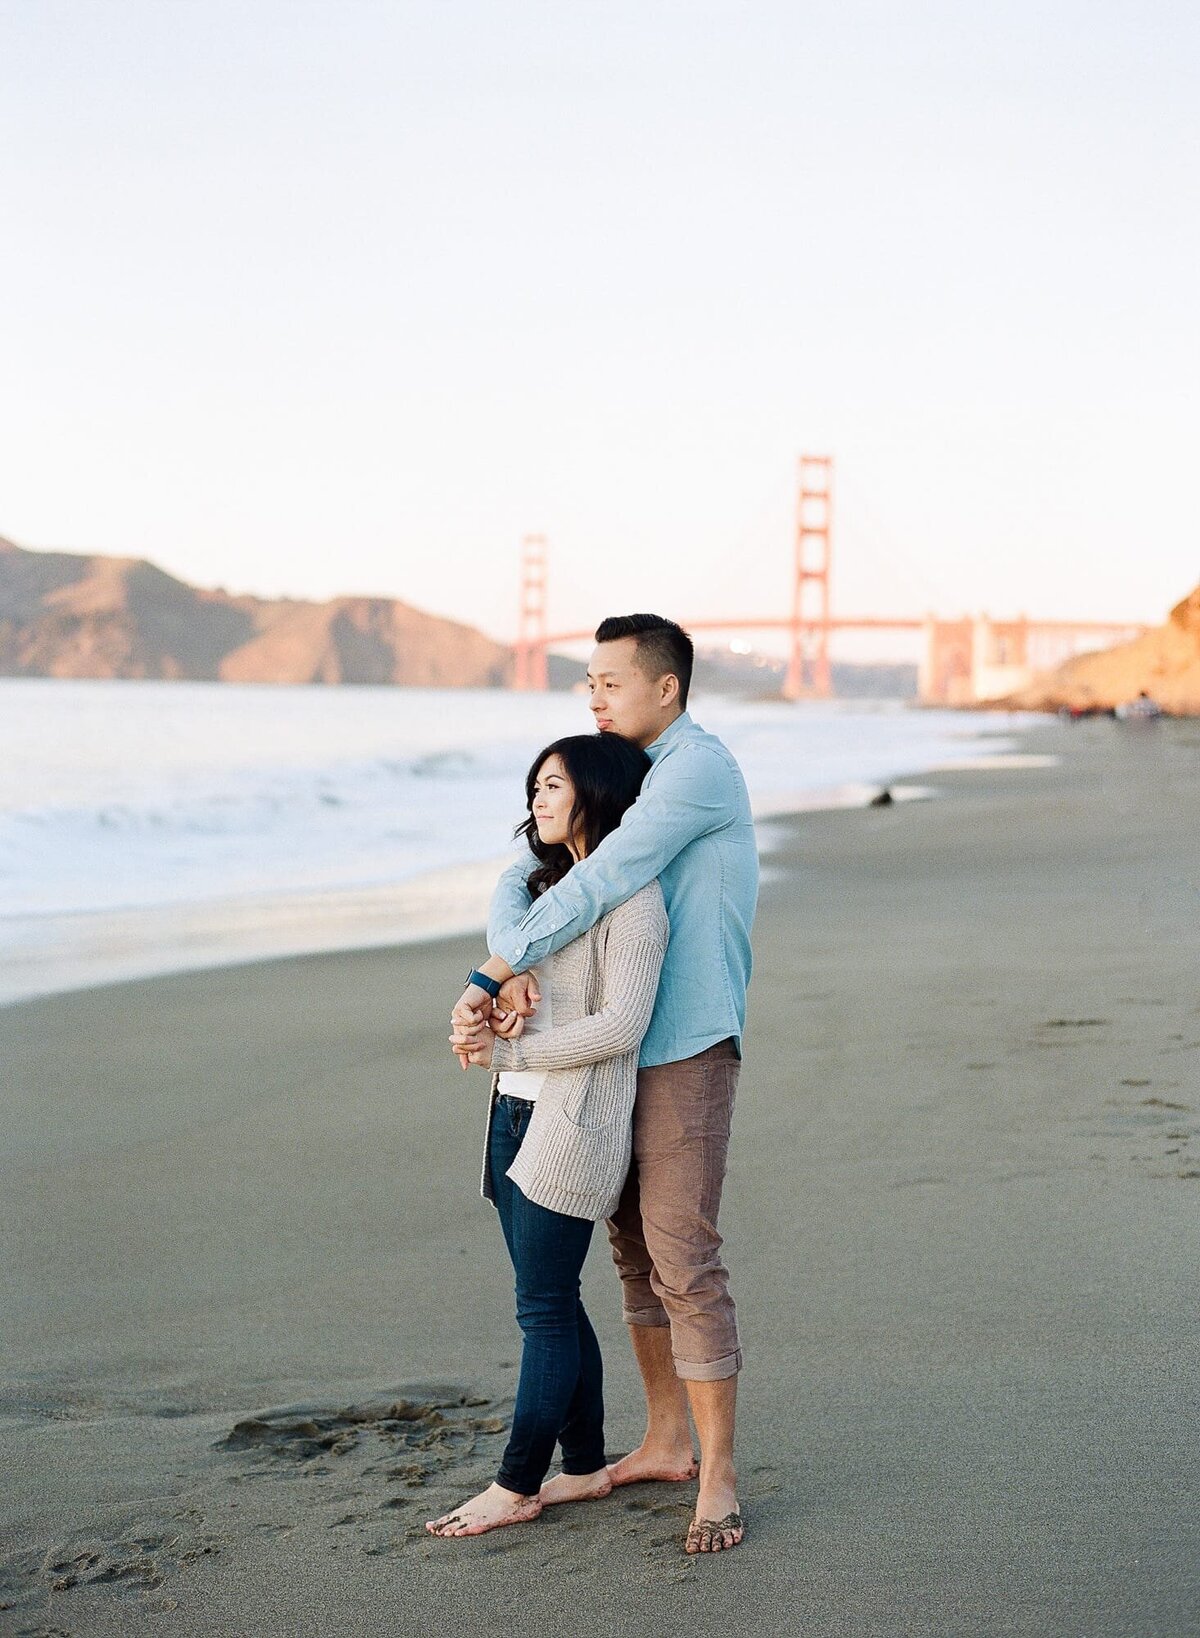 Best laid-back couple portrait photographer in San Francisco. Lady watches the sunset at the beach while her lover hugs her from behind.